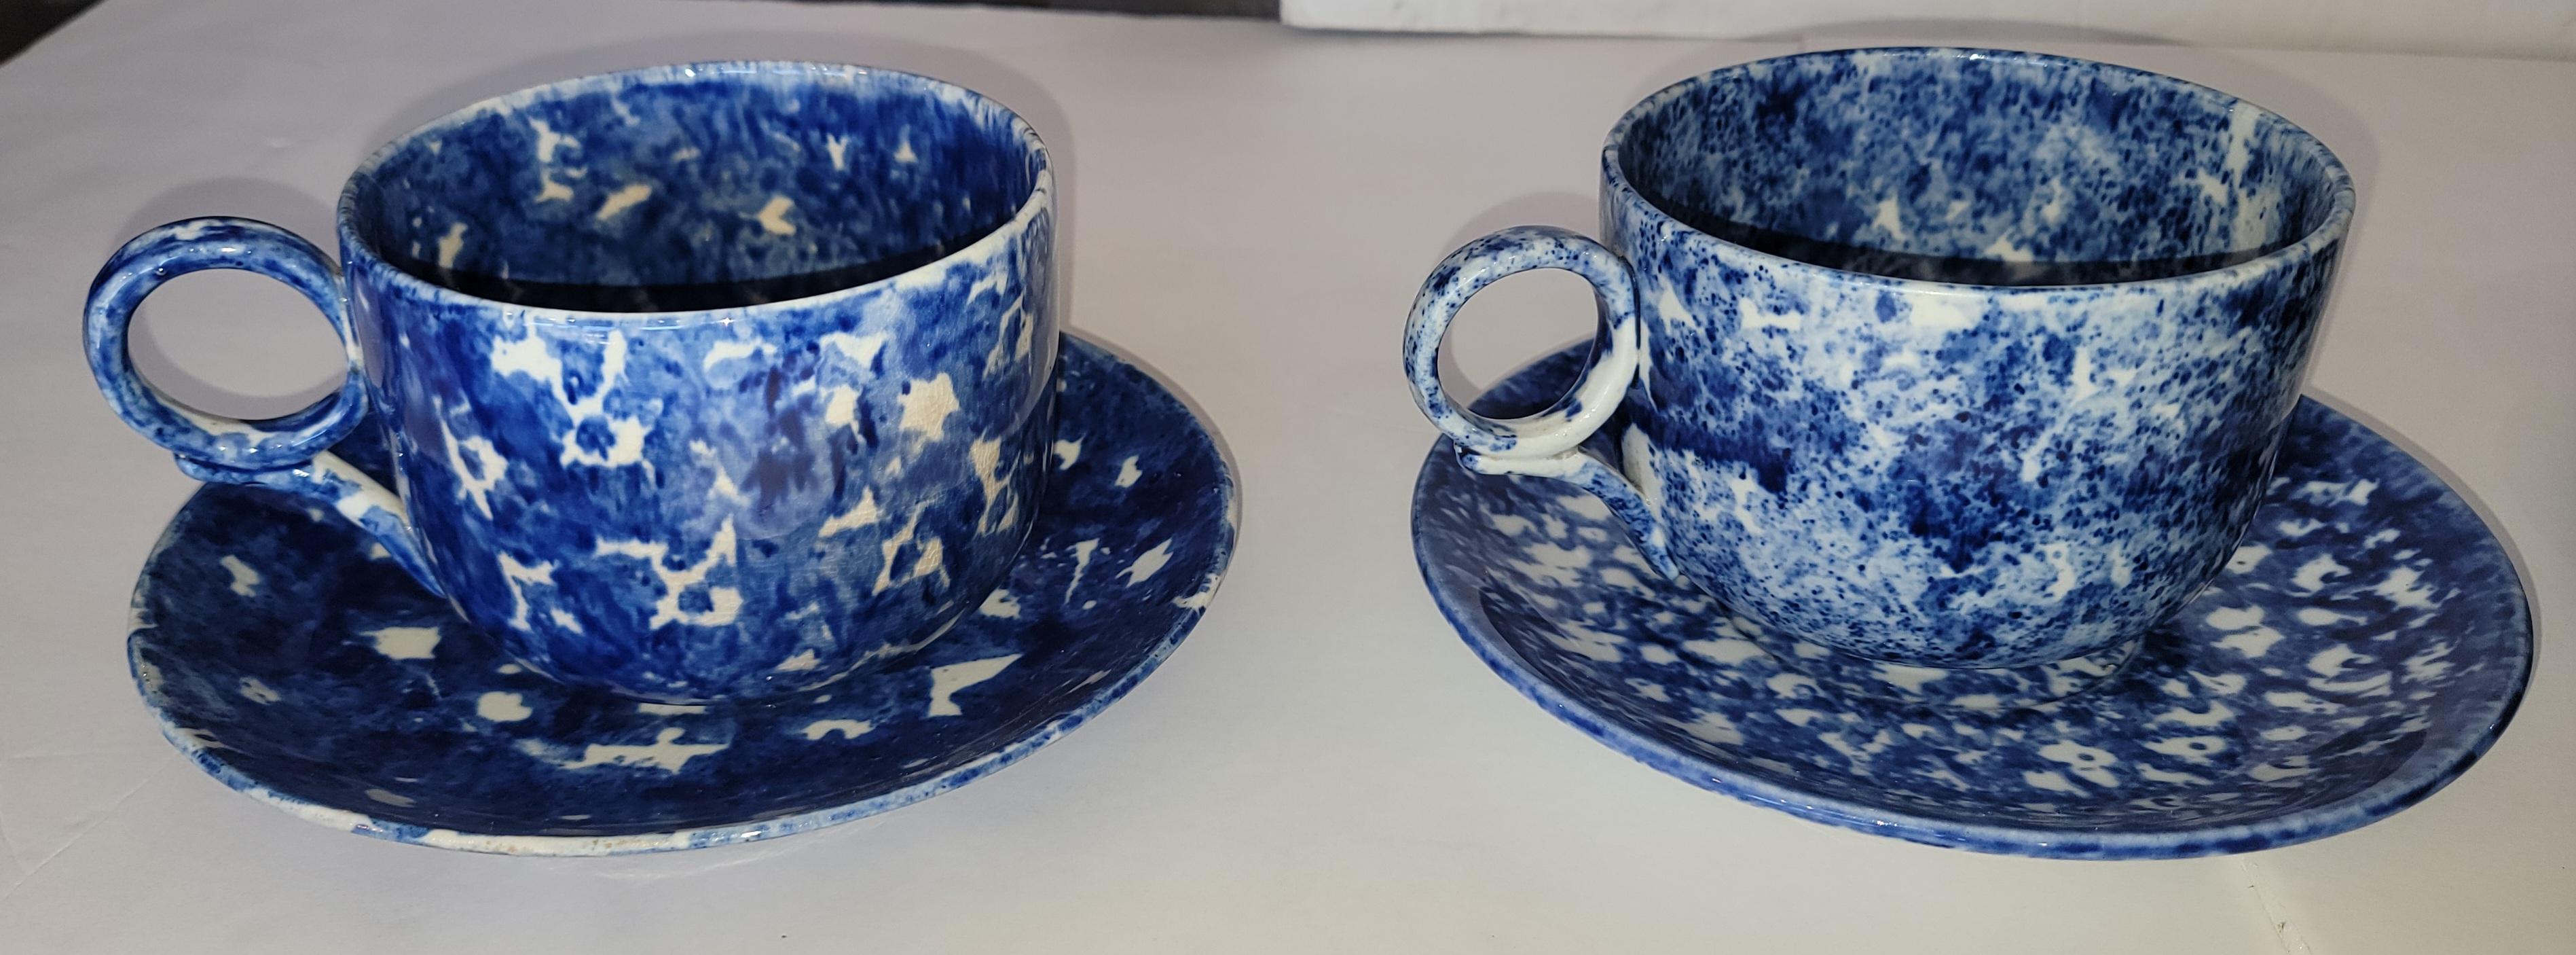 Glazed Collection of  Six Sponge Ware Mush Cups and Saucers For Sale